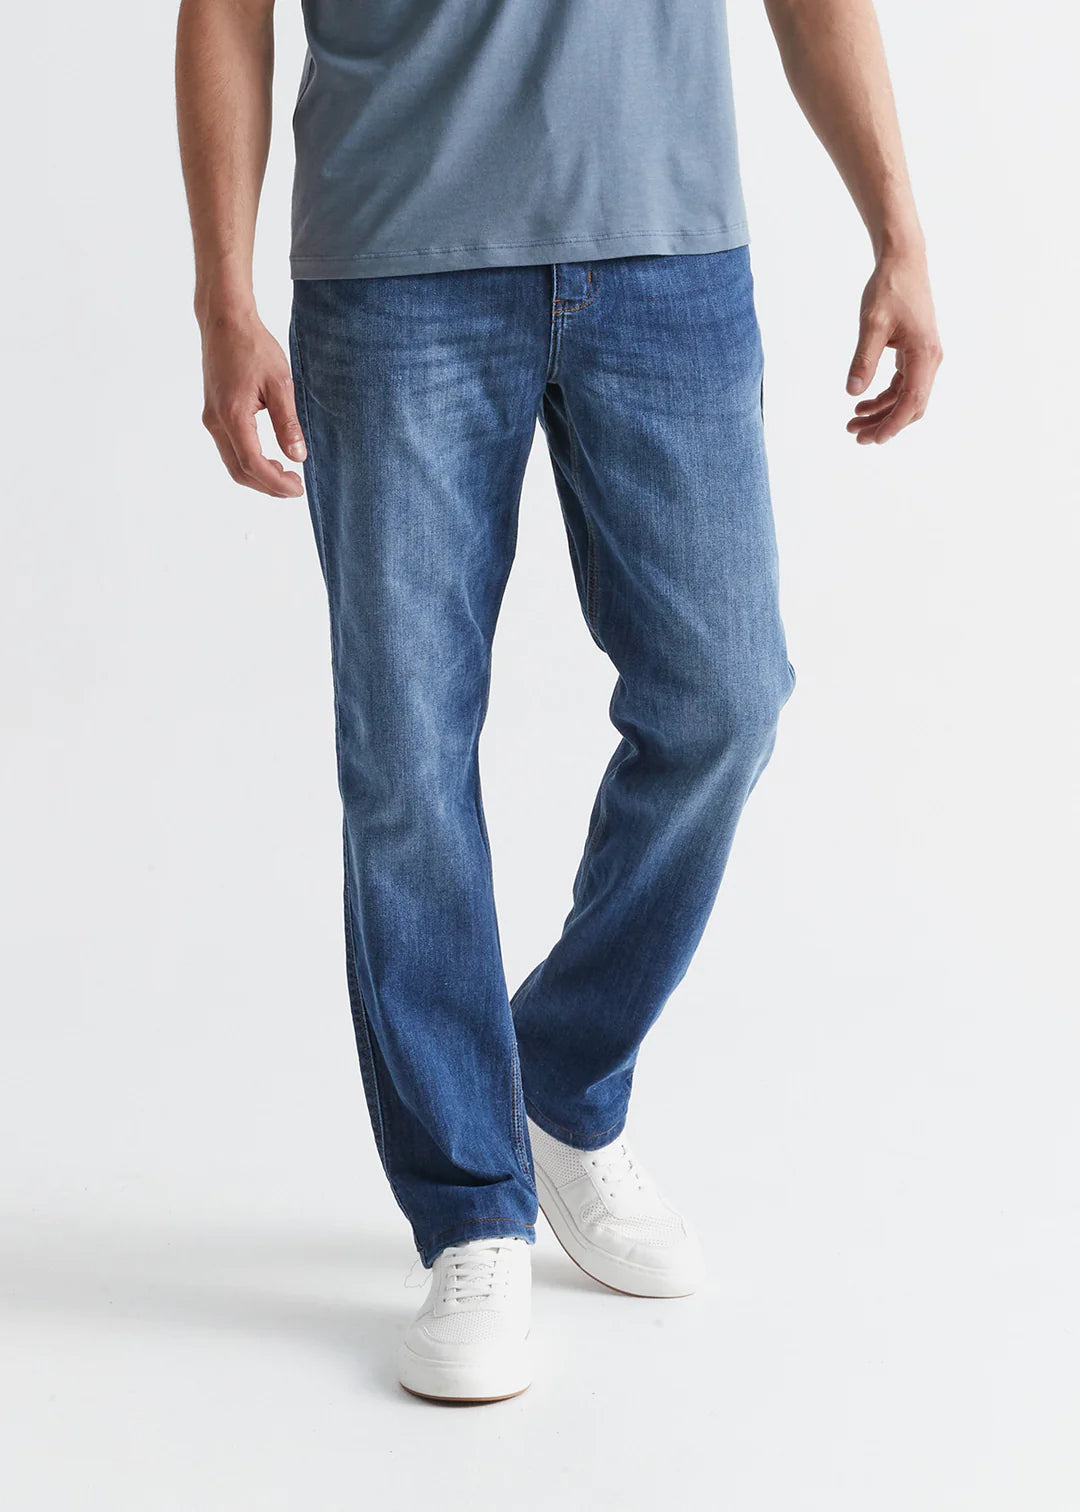 Performance Denim Athletic Straight Men's Jeans by DU/ER in color Galactic